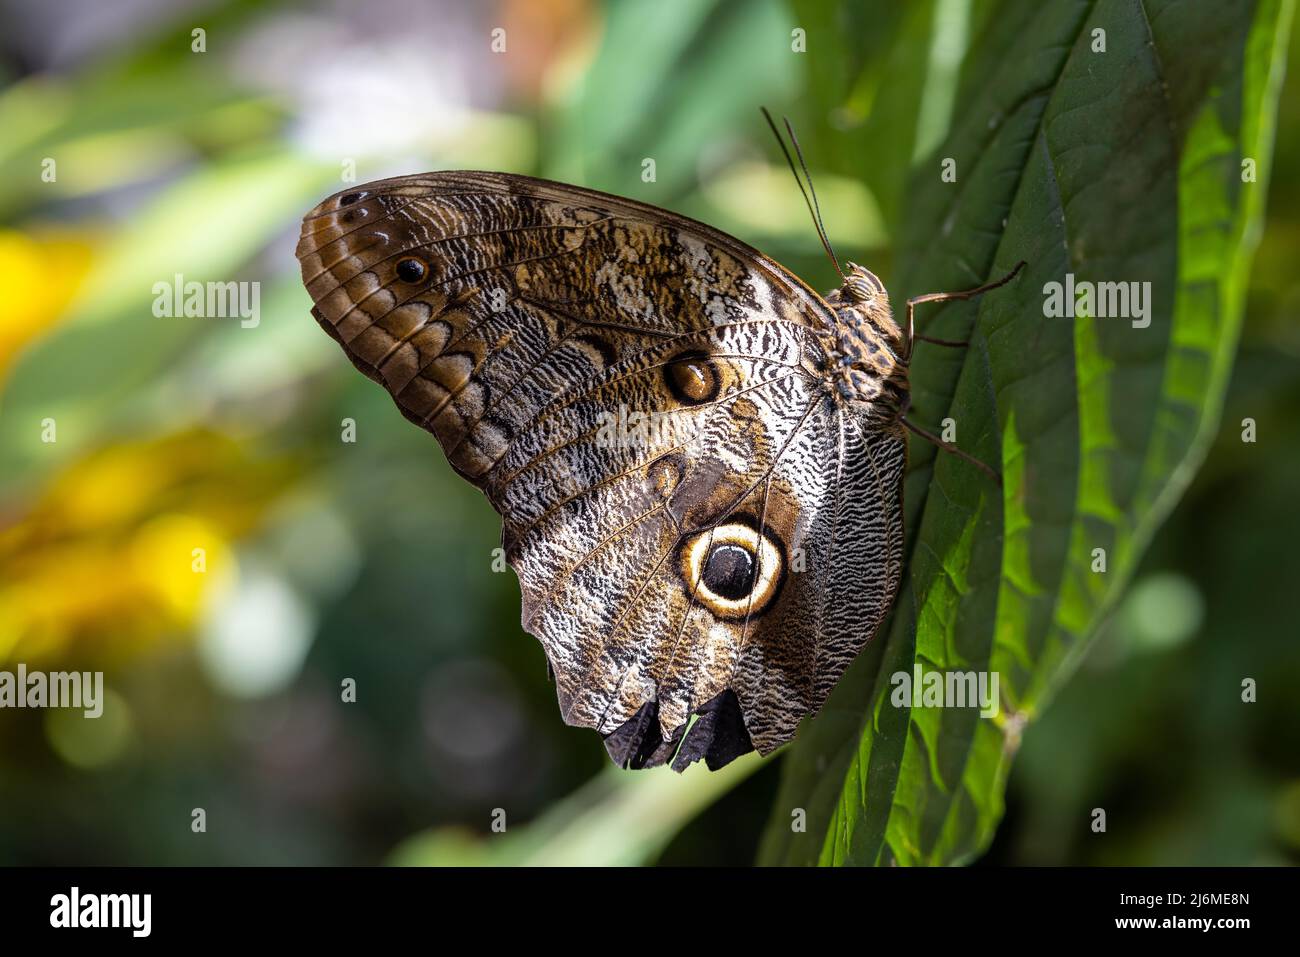 Closeup of the side of an Owl butterfly perched on a green leaf Stock Photo